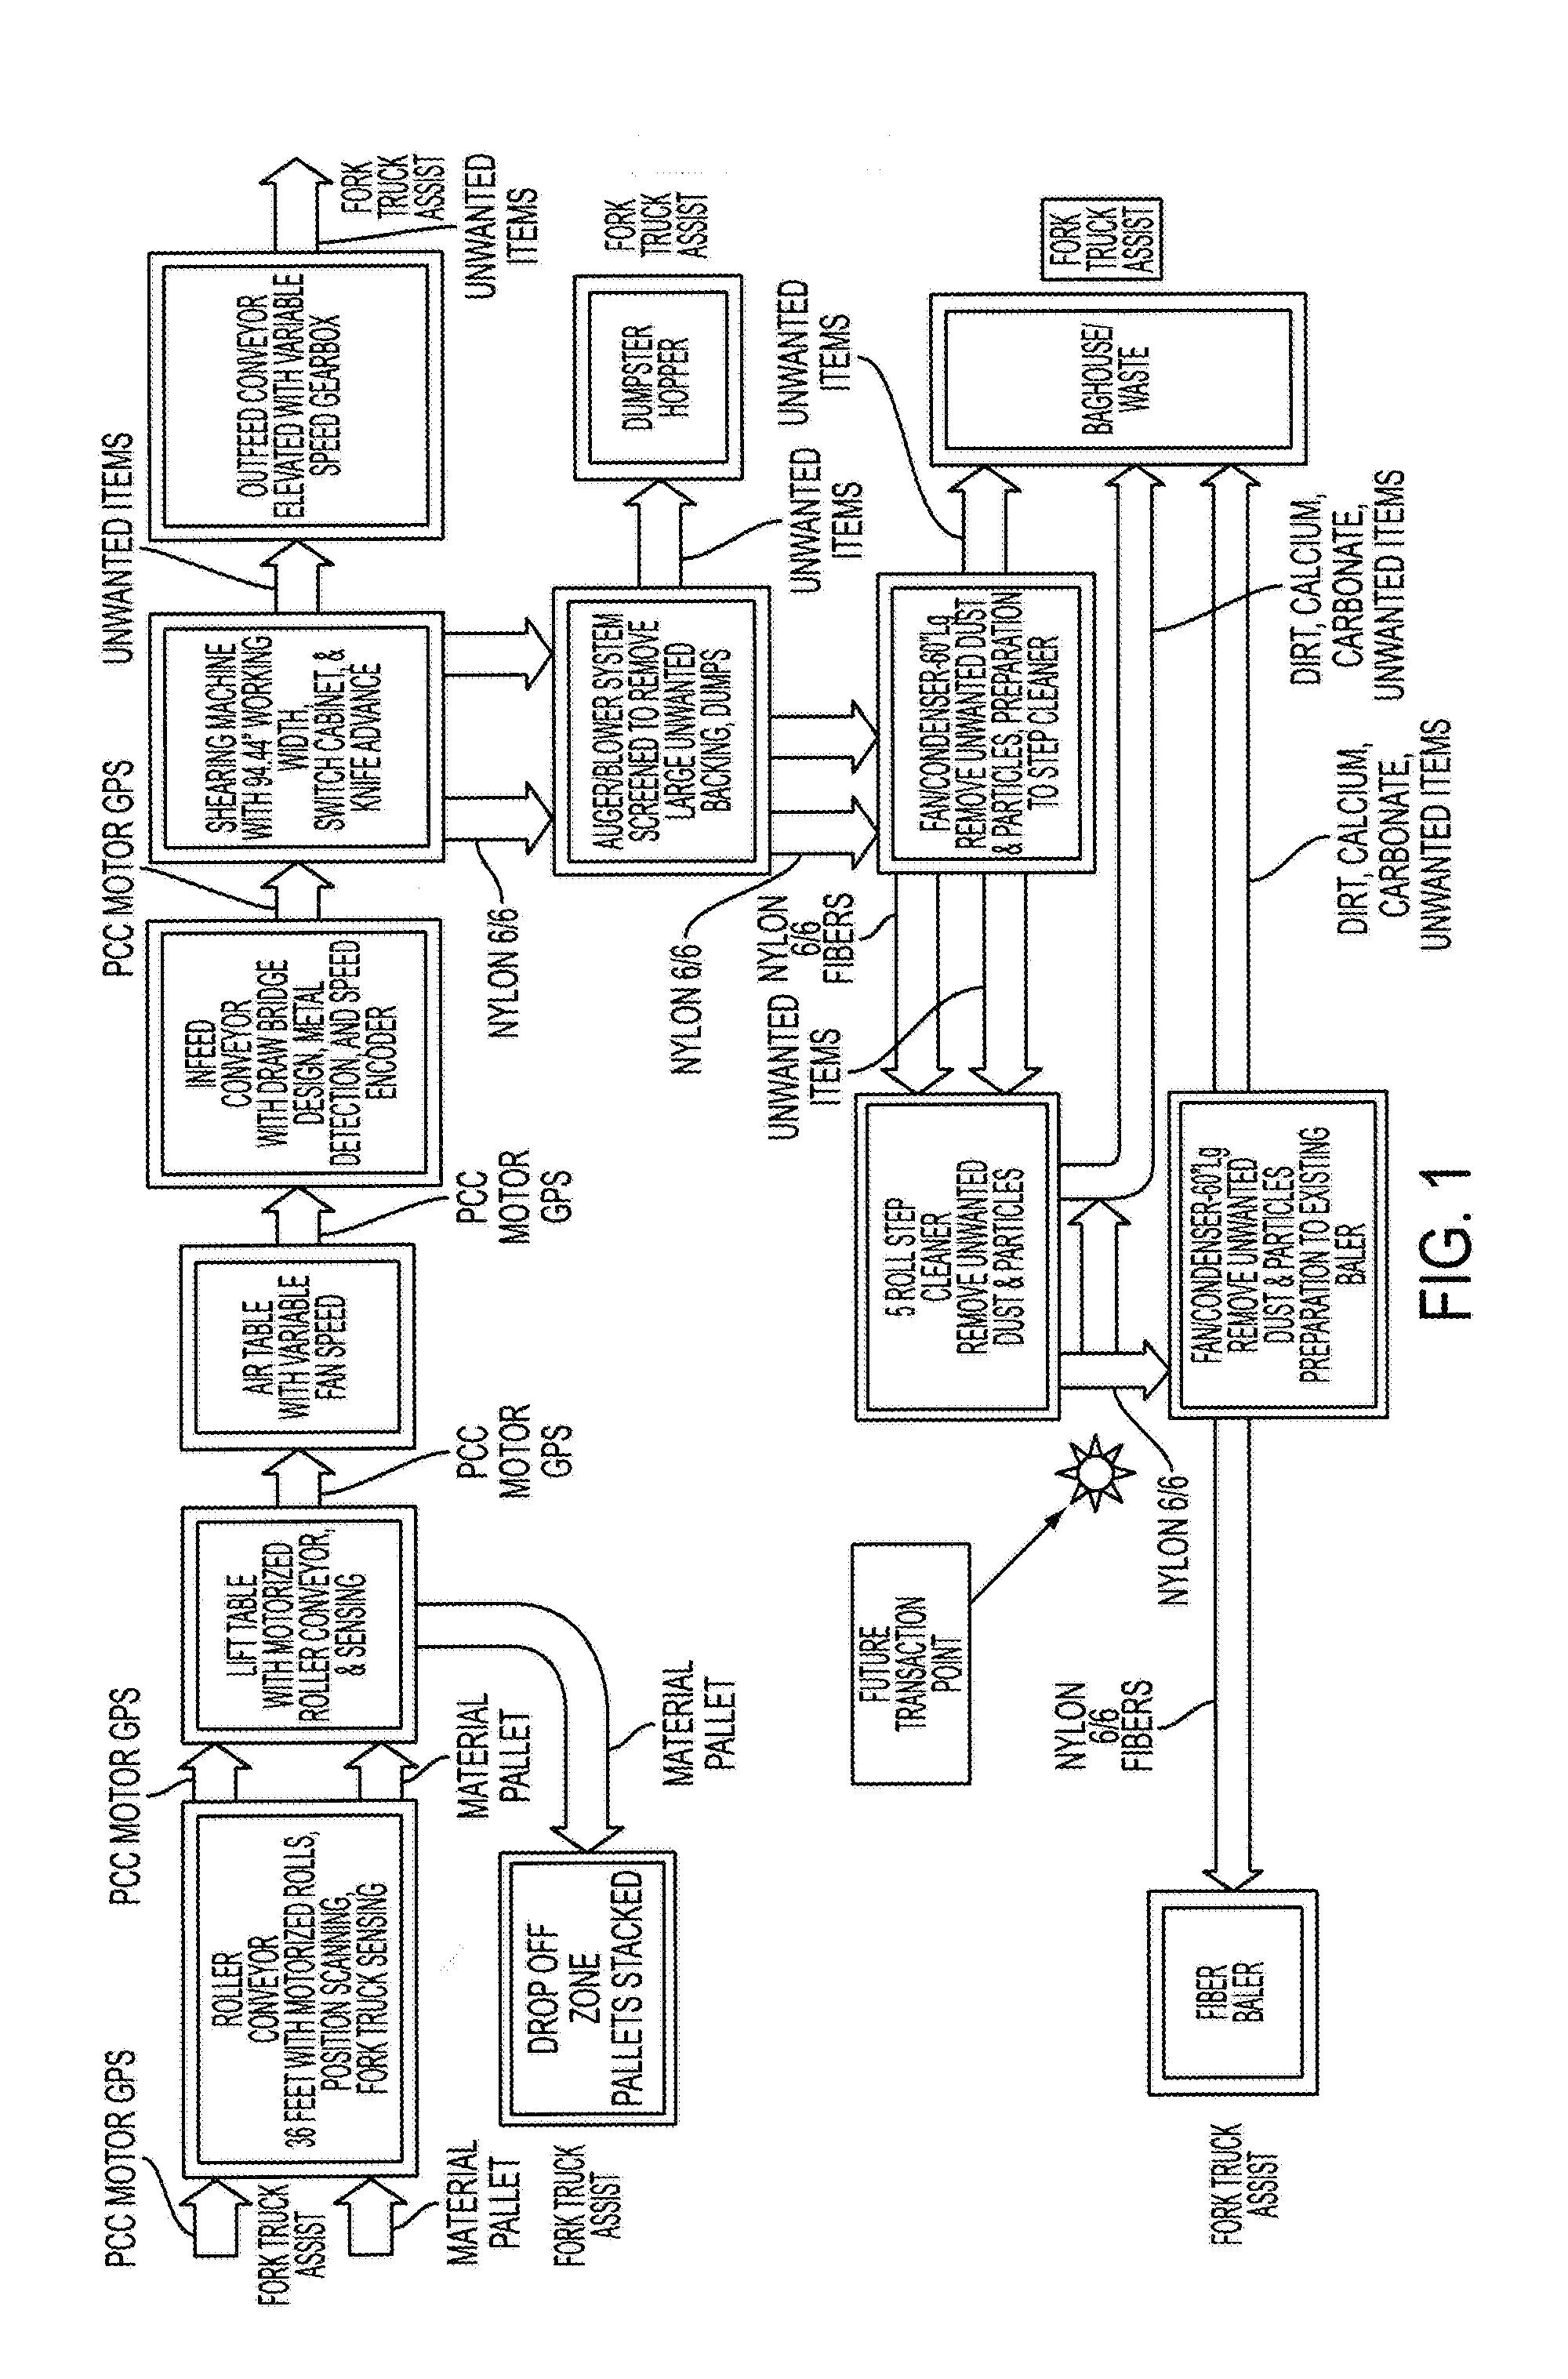 System and method for reclaiming waste carpet materials